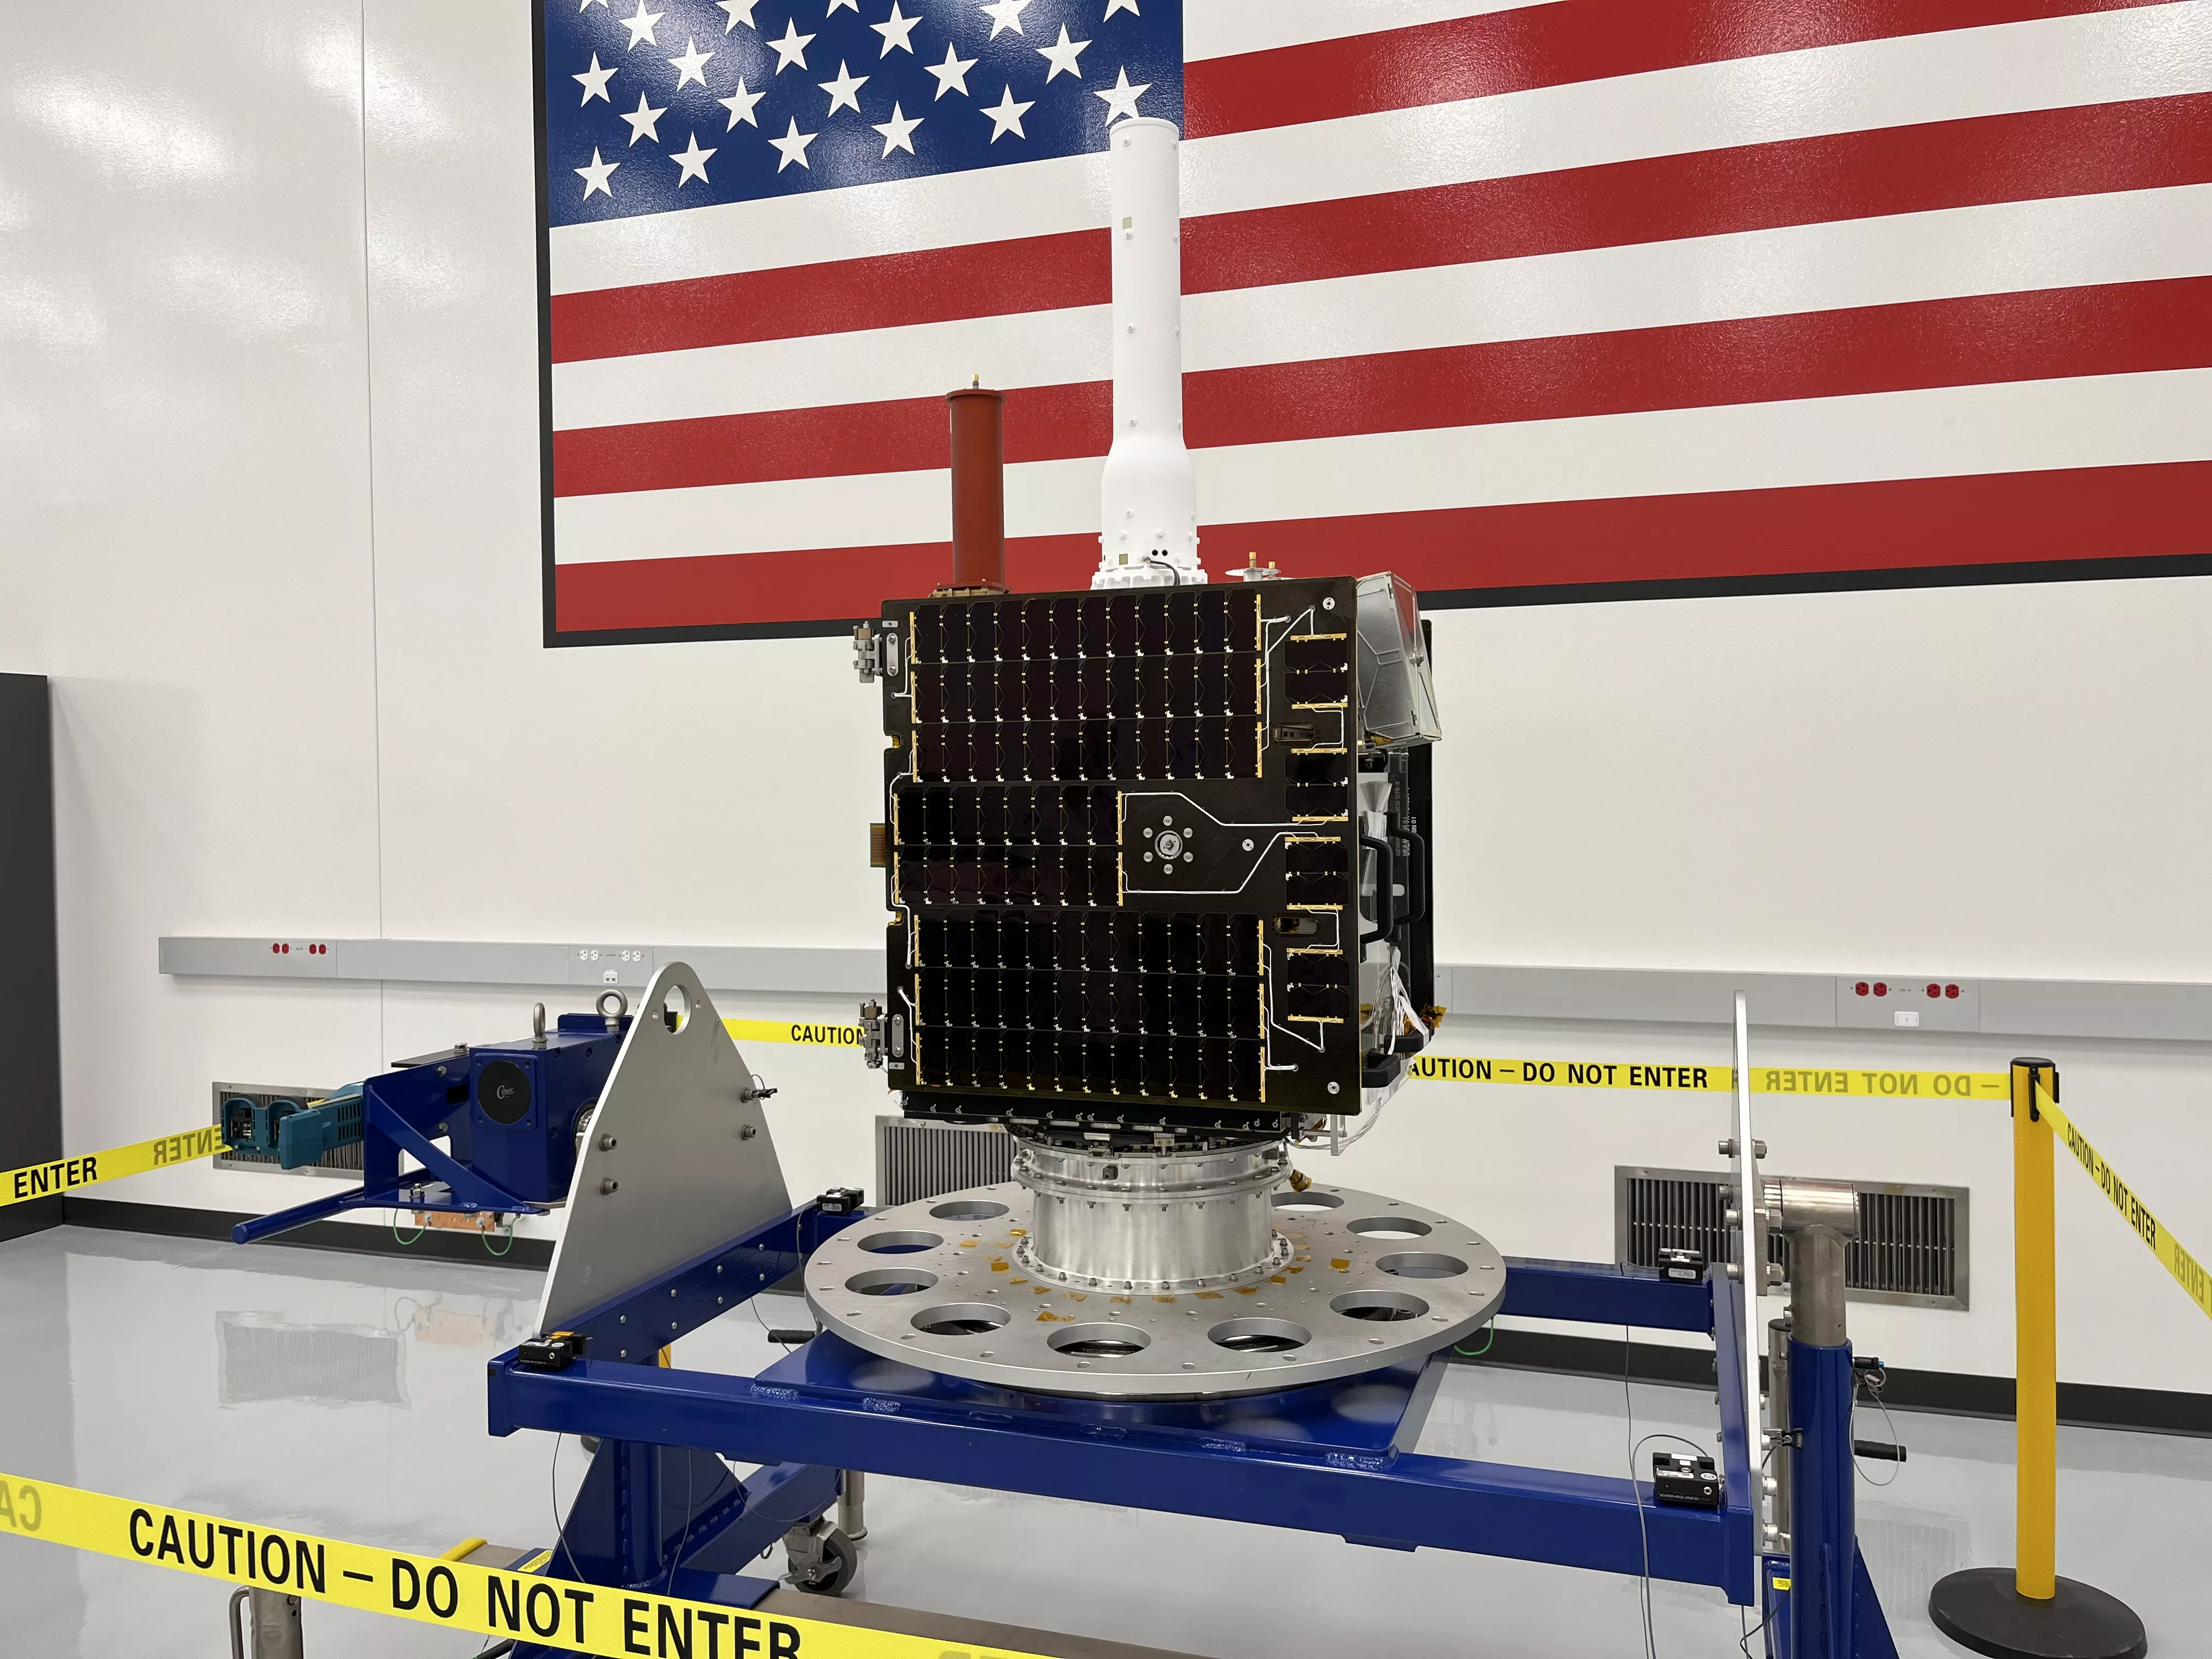 The GAzelle satellite prior to the Pre-Ship review at the General Atomics integration facility in Centennial, CO.